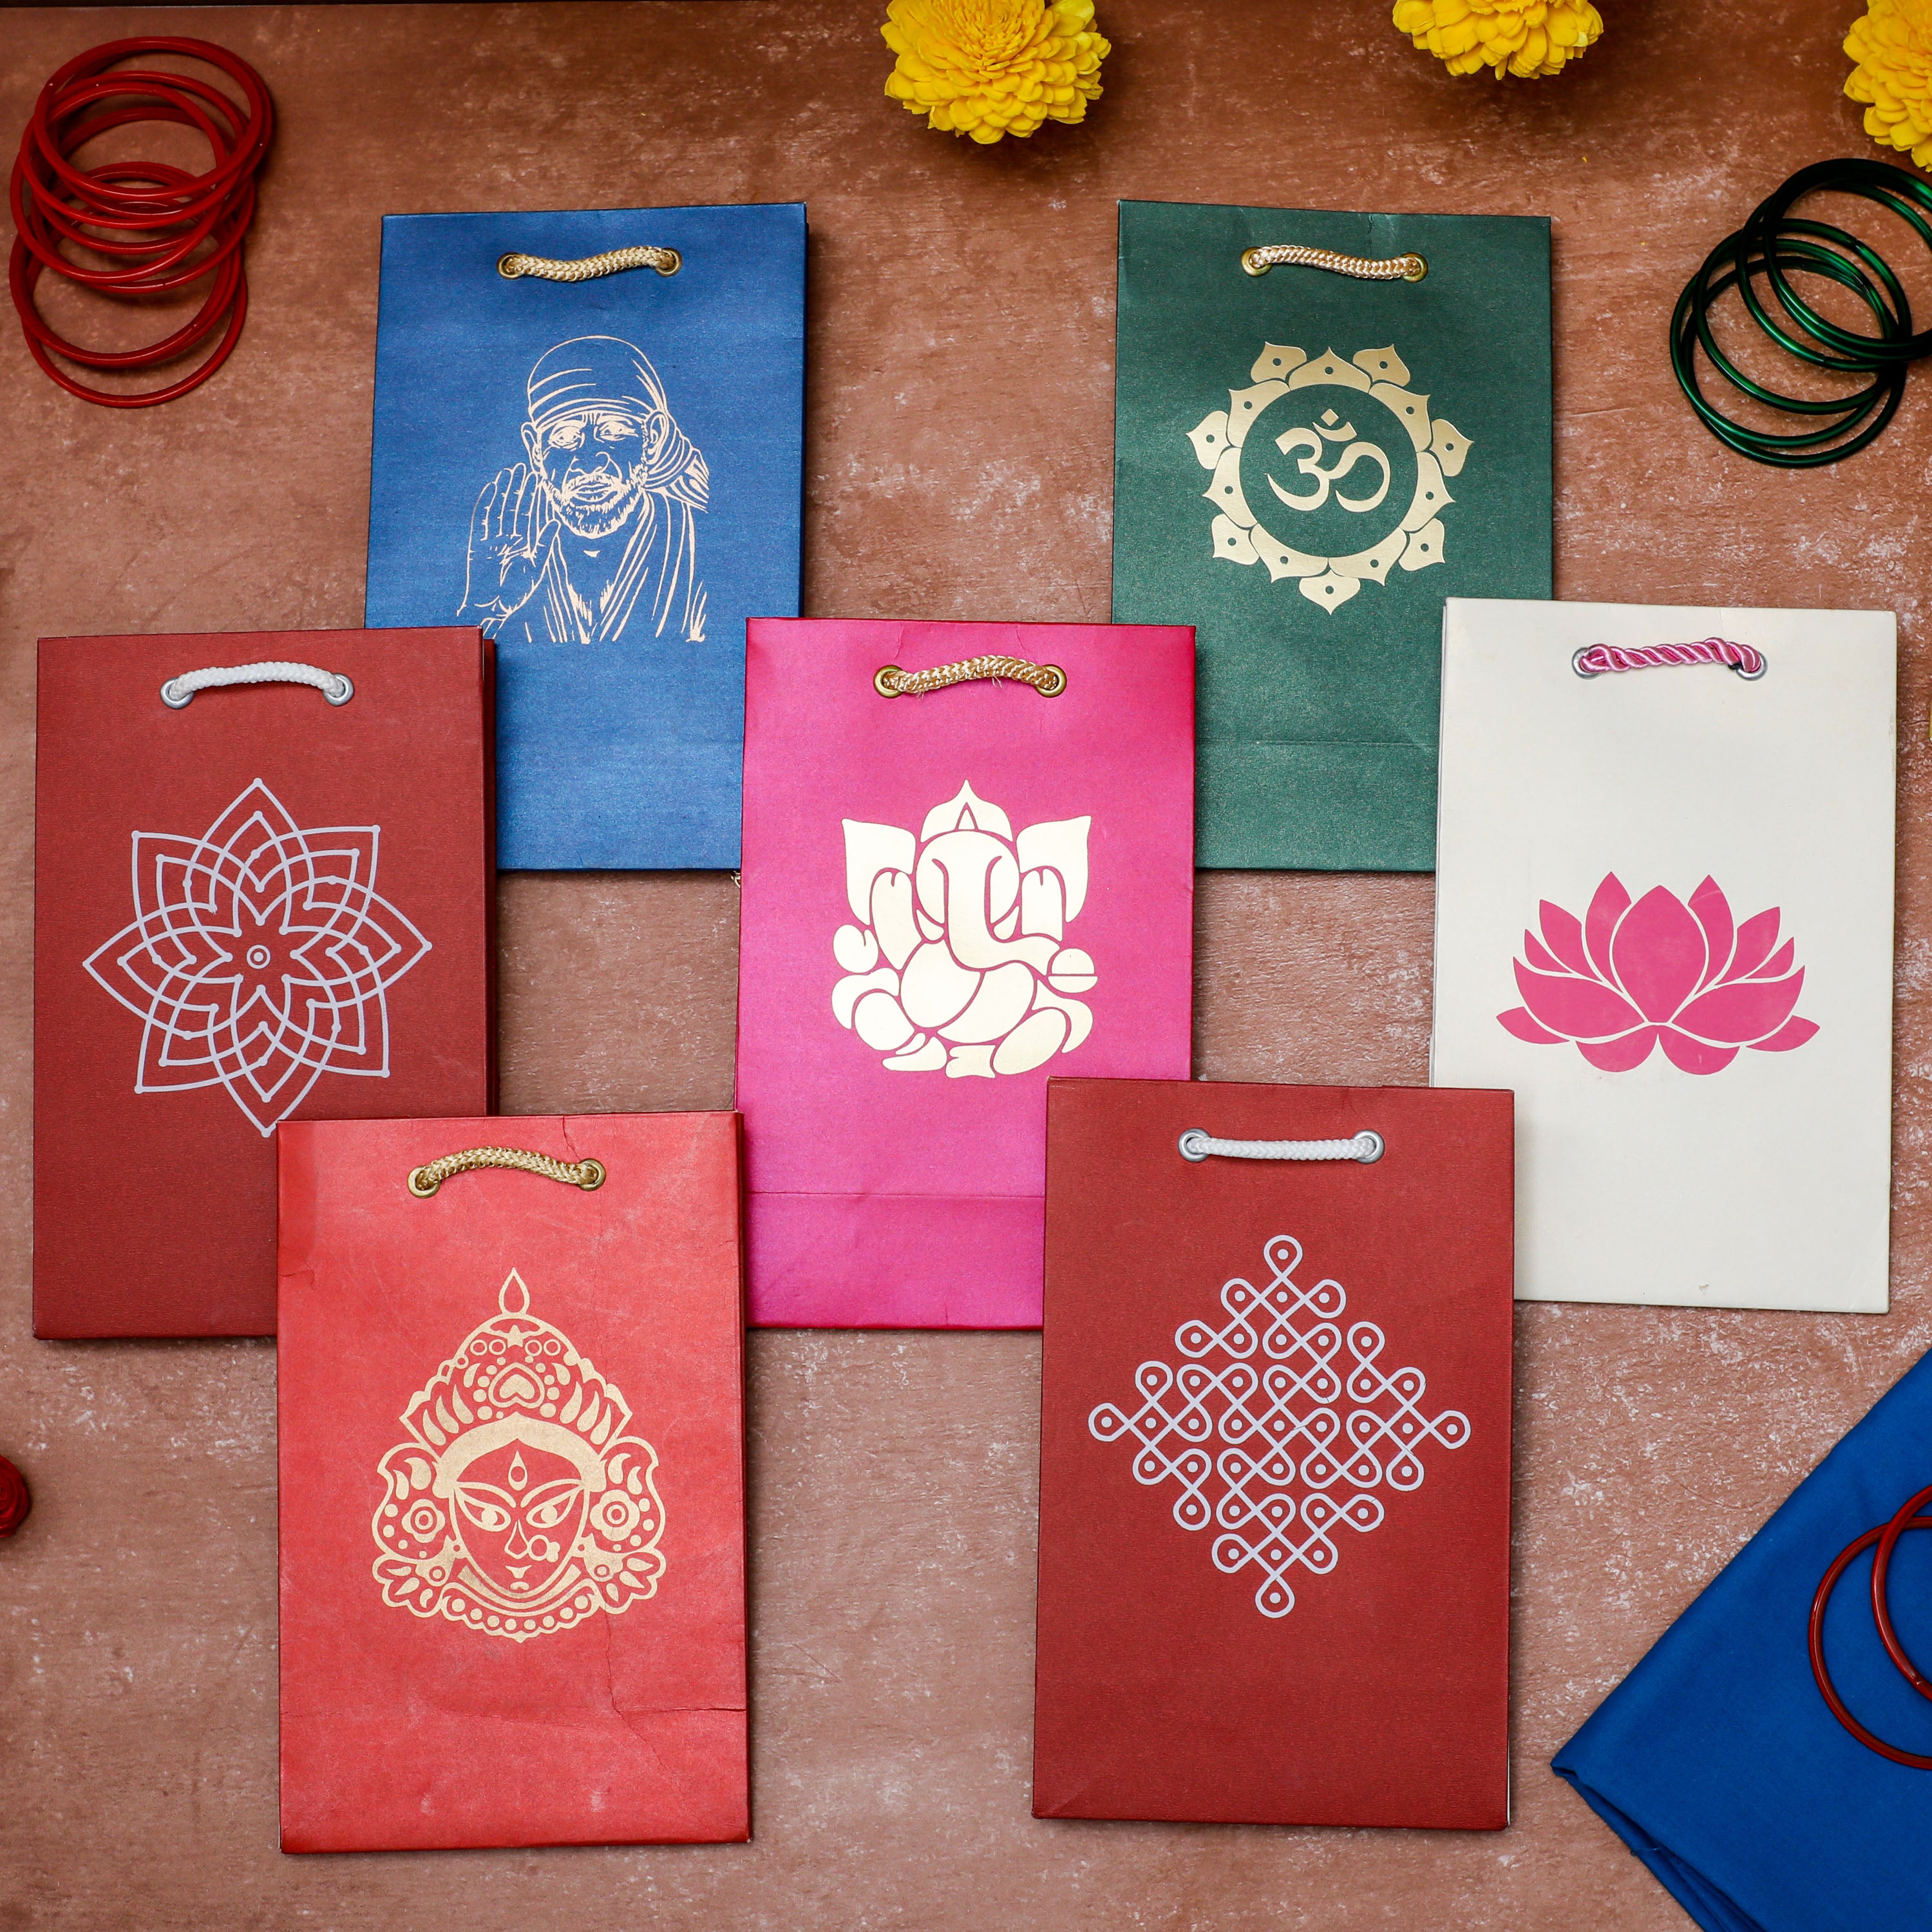 Personalized secret Santa gifts under 500 rupees | Incredible Planet